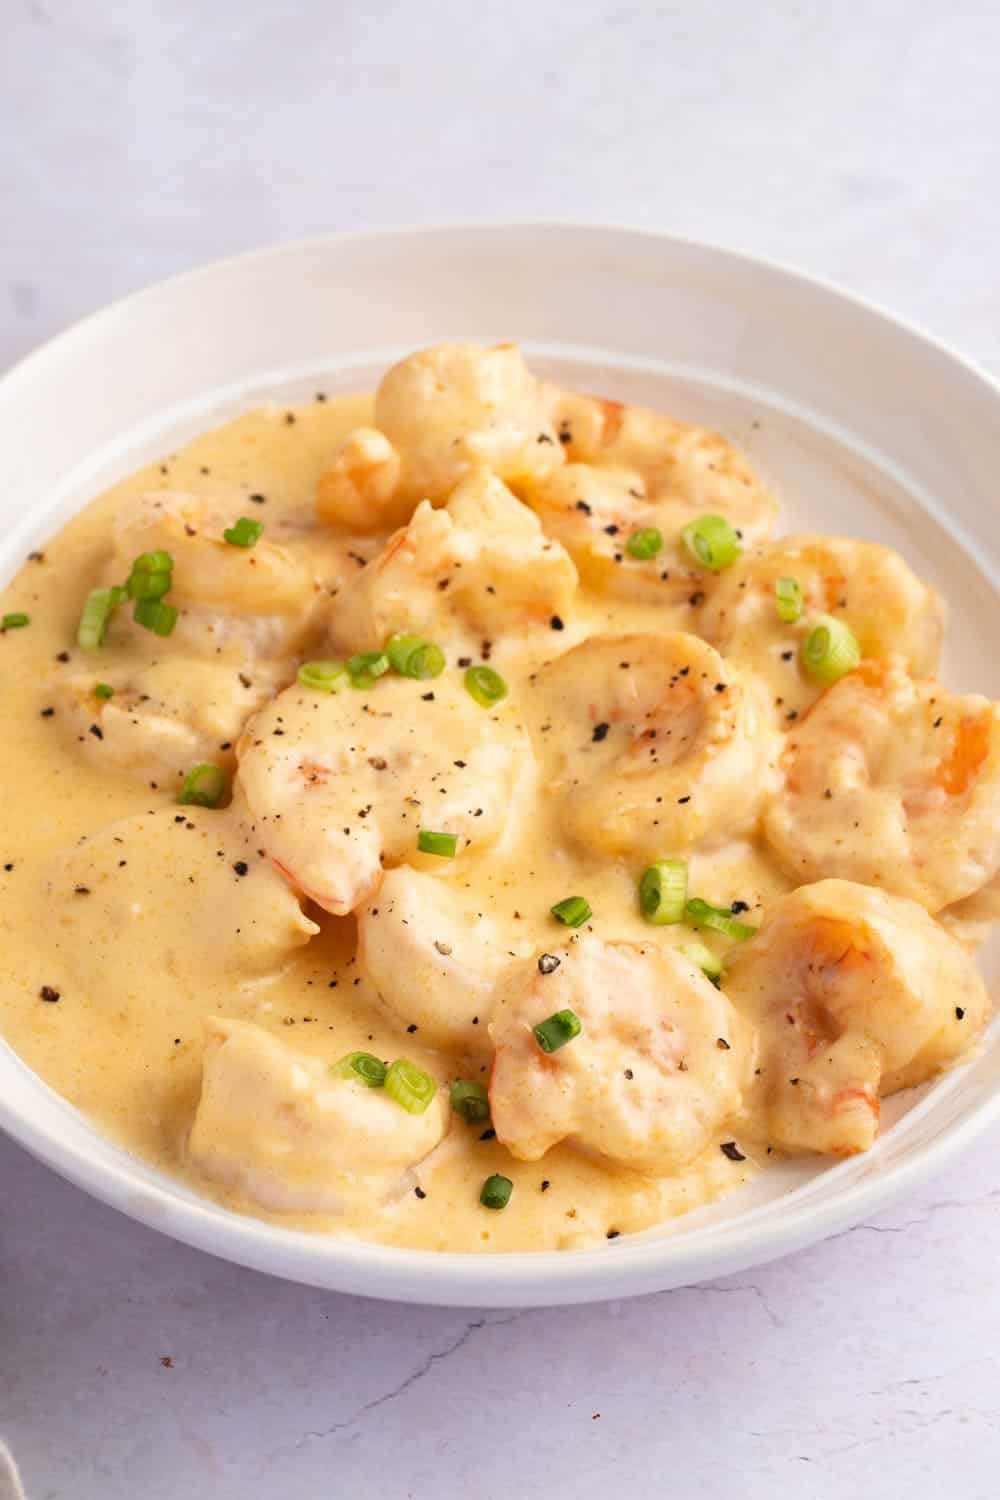 Creamy Shrimp Newburg in a White Bowl, Garnished With Sliced Onions and Black Pepper.
